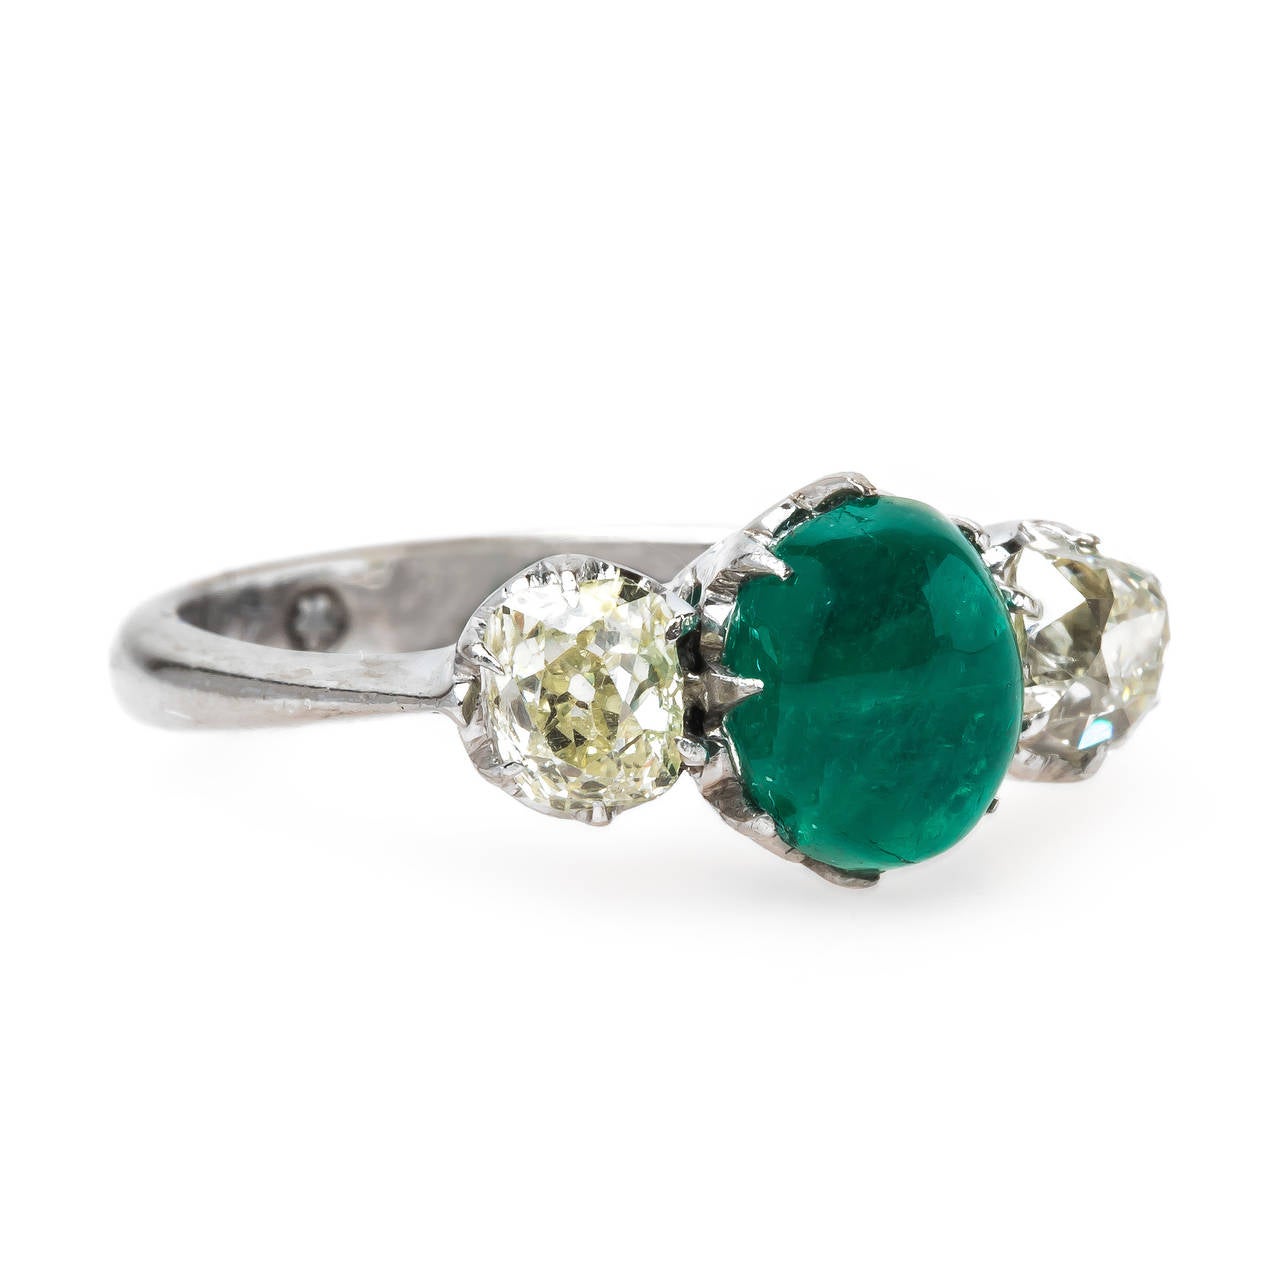 Sunswept is an unusual and authentic Art Deco (circa 1920) 14k white gold ring featuring a unique three-stone combination of stones. A beautifully saturated green natural Cabochon emerald centers the ring, gauged at approximately 1.75cts and